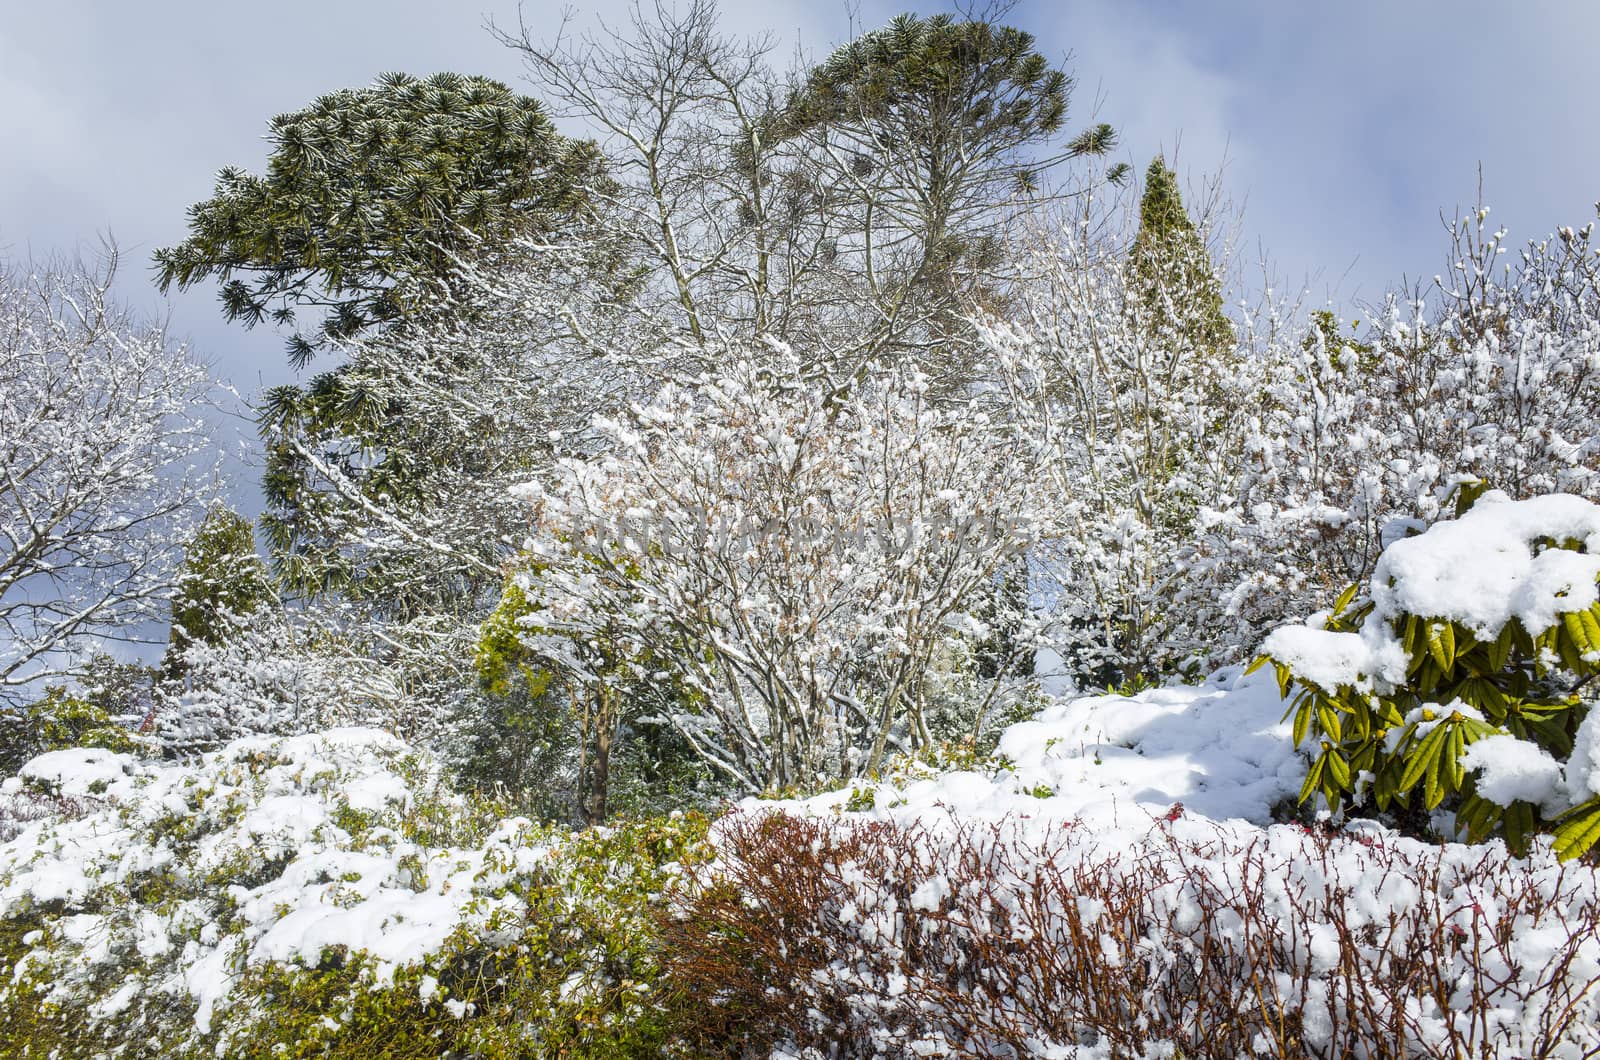 Snow covered garden with green plants, shrubbery and trees by jaaske